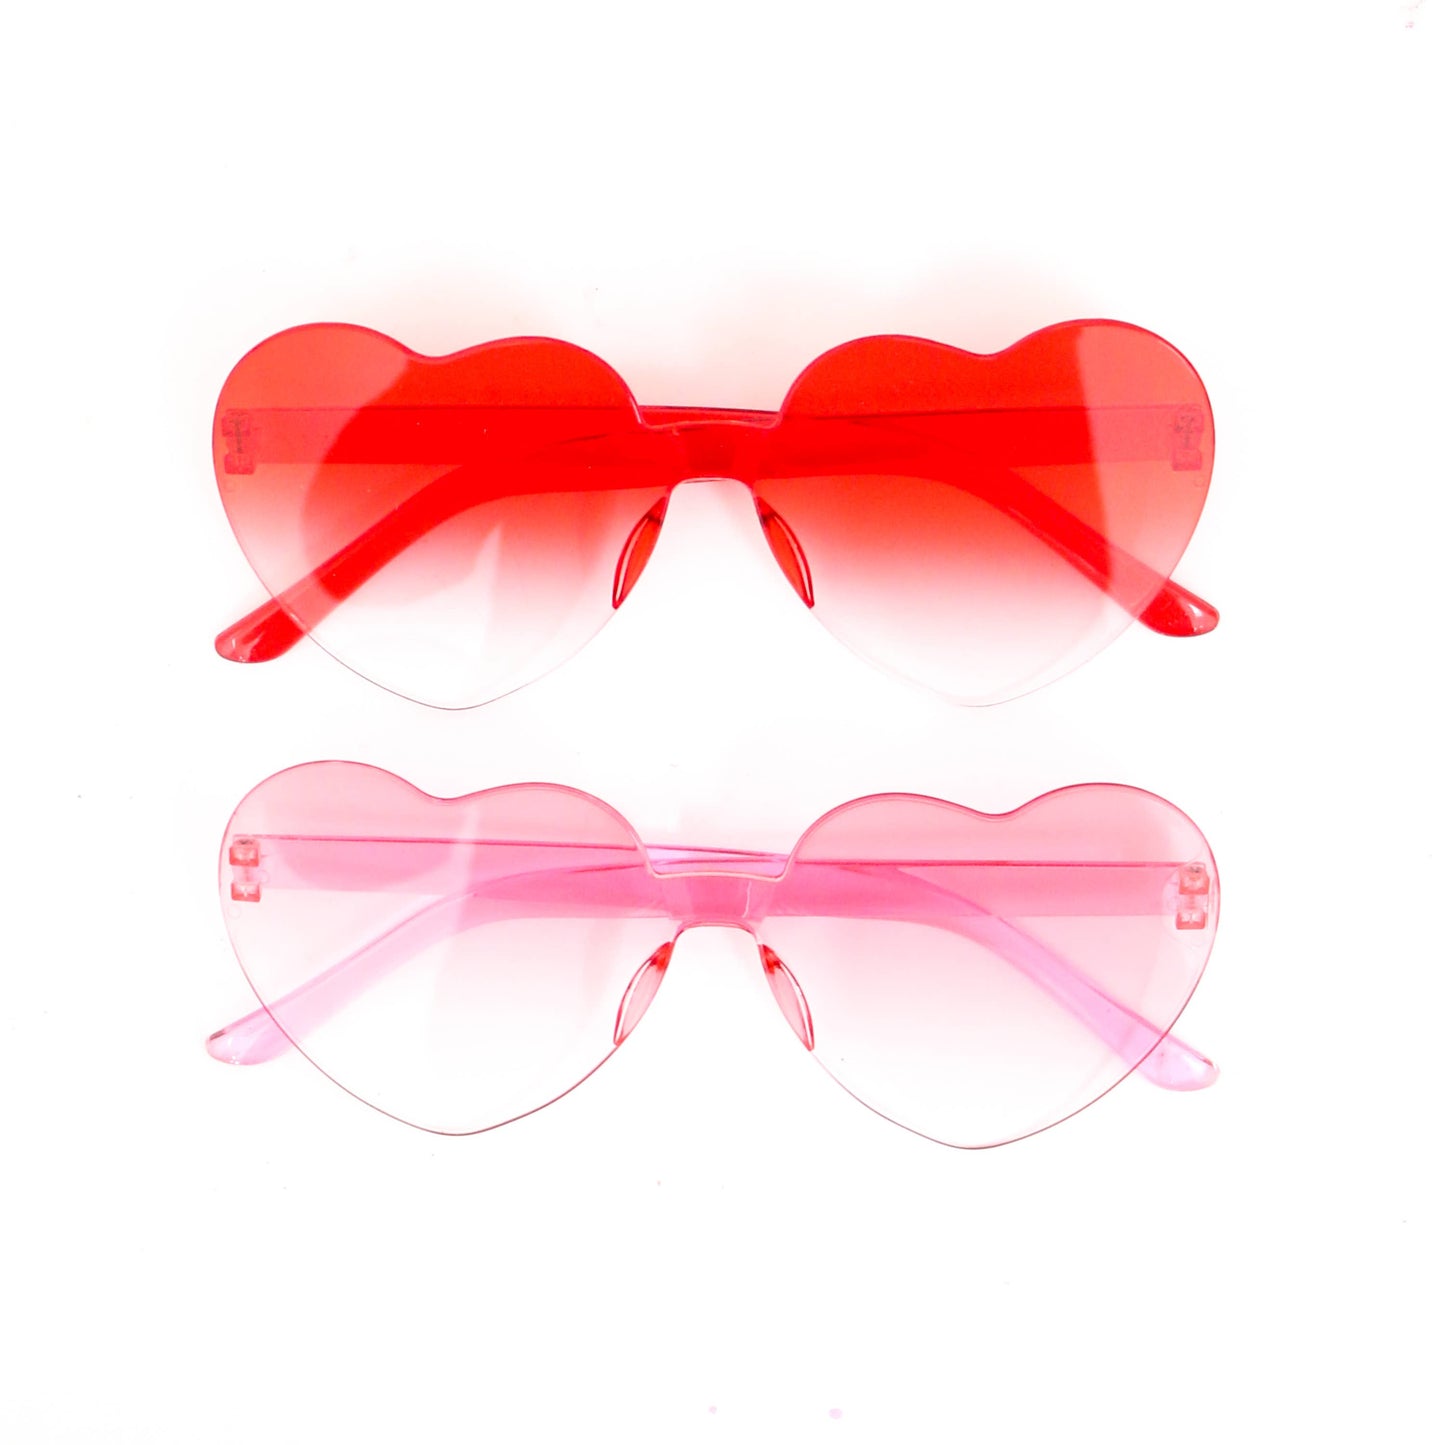 Kailo Chic - Pink and Red ombré heart sunglasses